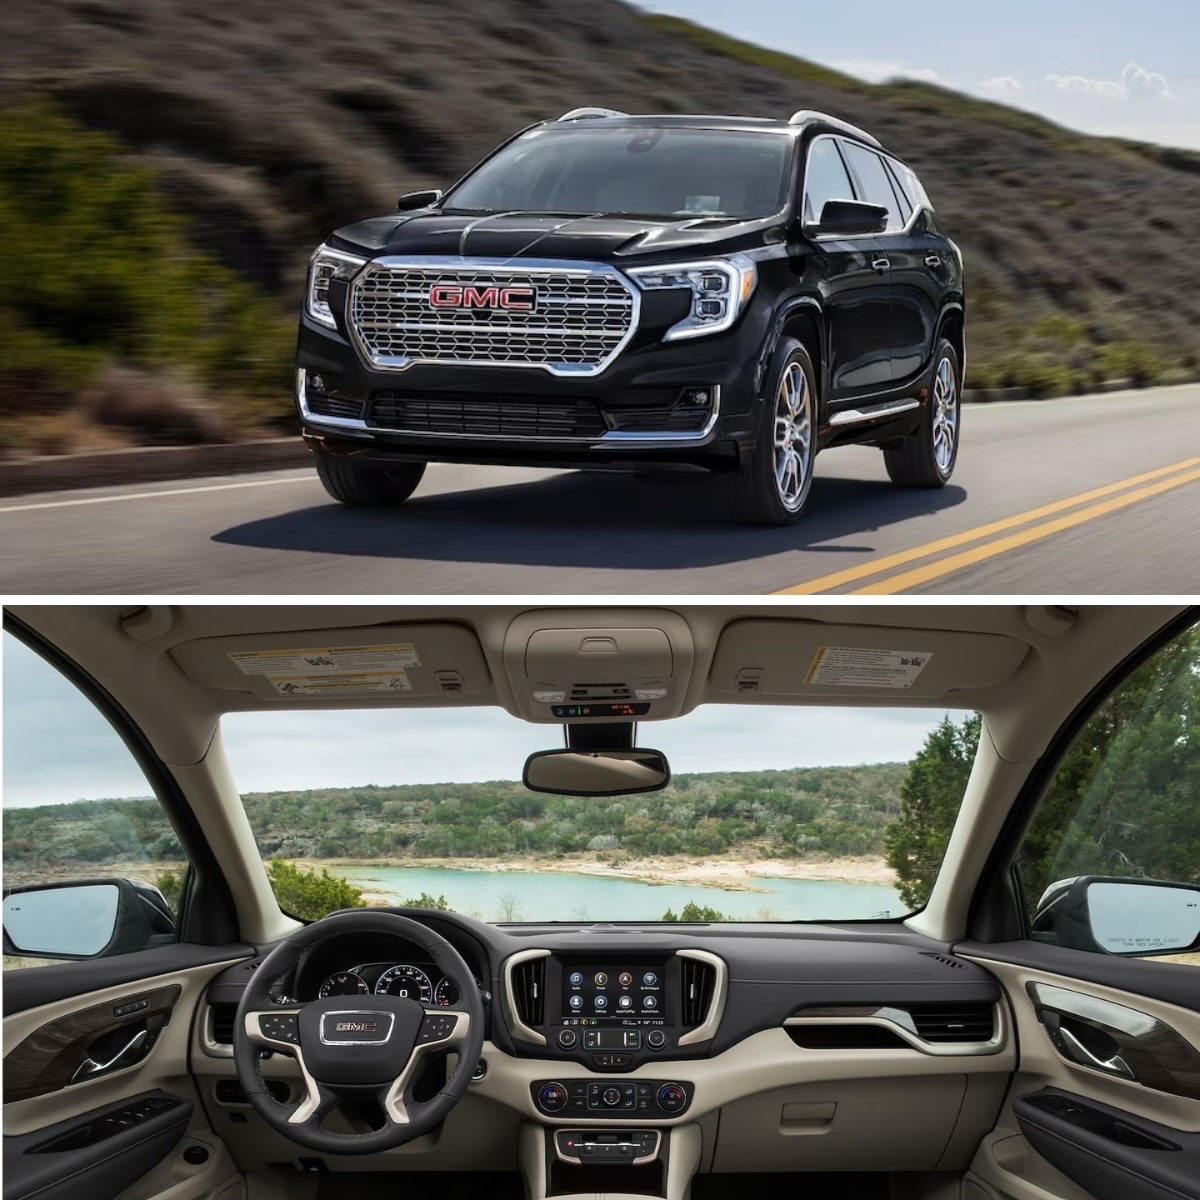 Are you ready for adventure? We know the all-new 2024 #GMCTerrain is. 👀 With its perfect blend of comfort, style, and rugged capability, every destination feels closer. Visit us today to hit the road! 🚗💨 #CarCrushWednesday #GMC #GMCUSA